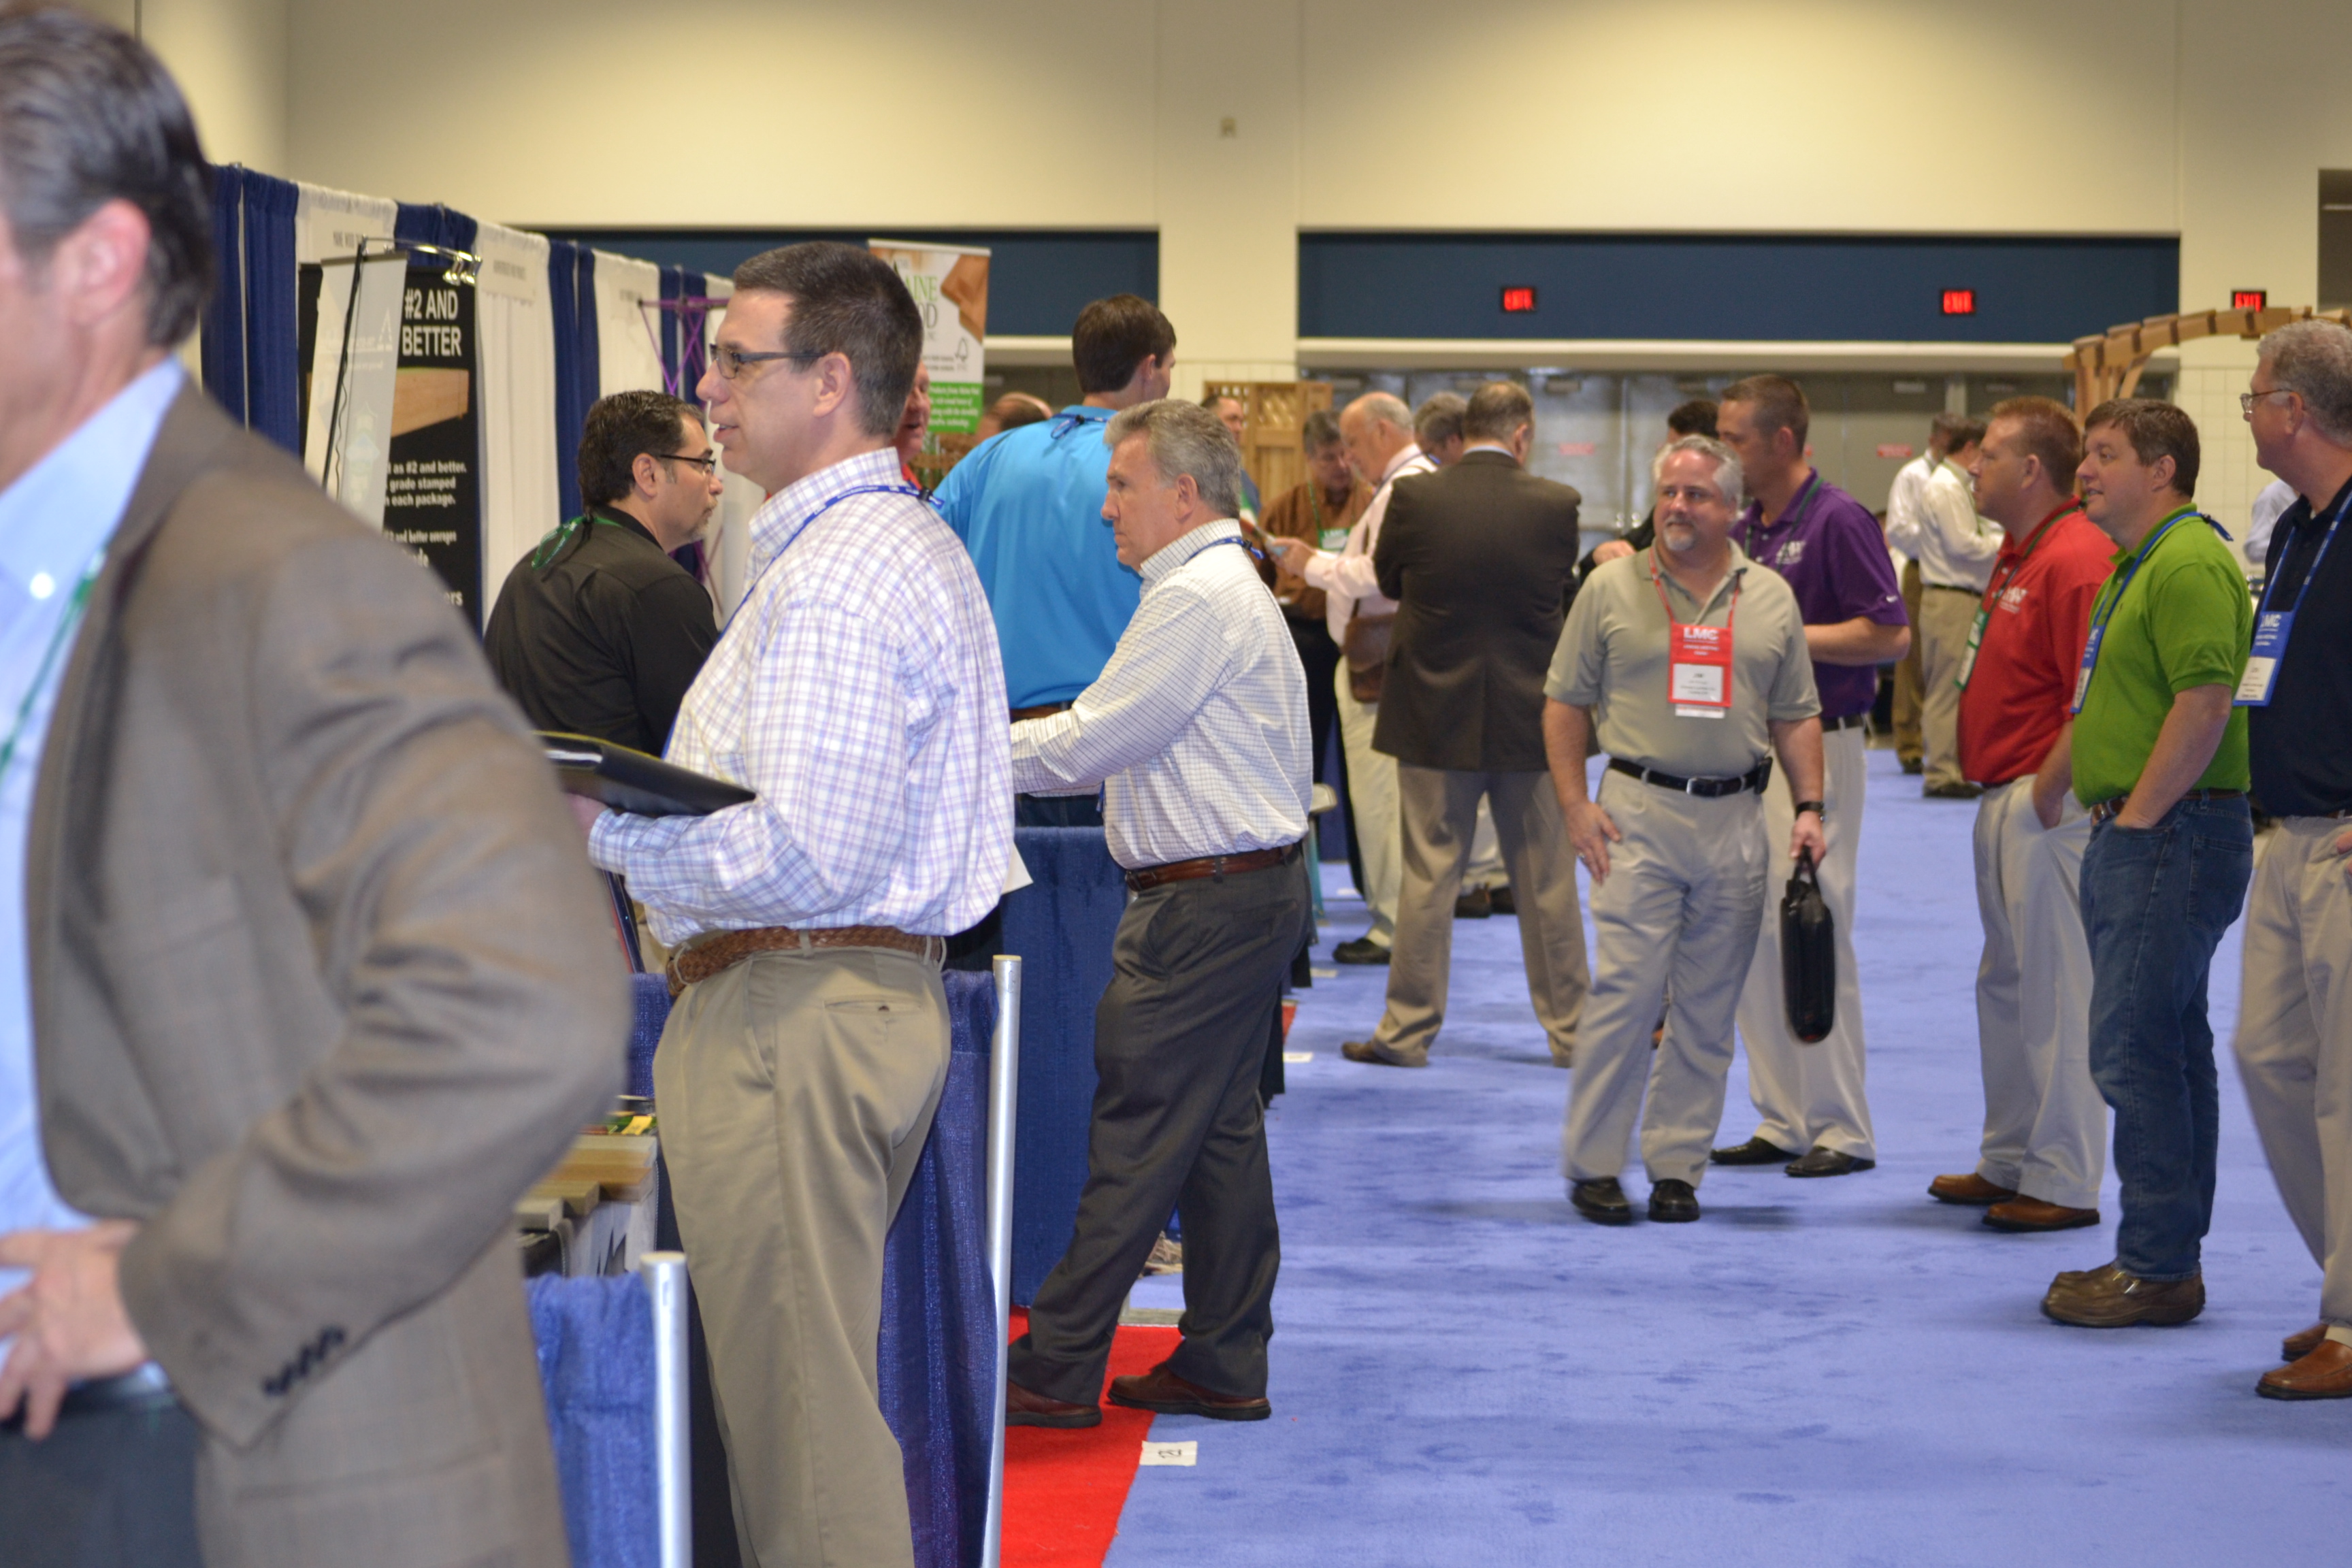 Busy Showfloor in Tampa for LMC's Annual Meeting